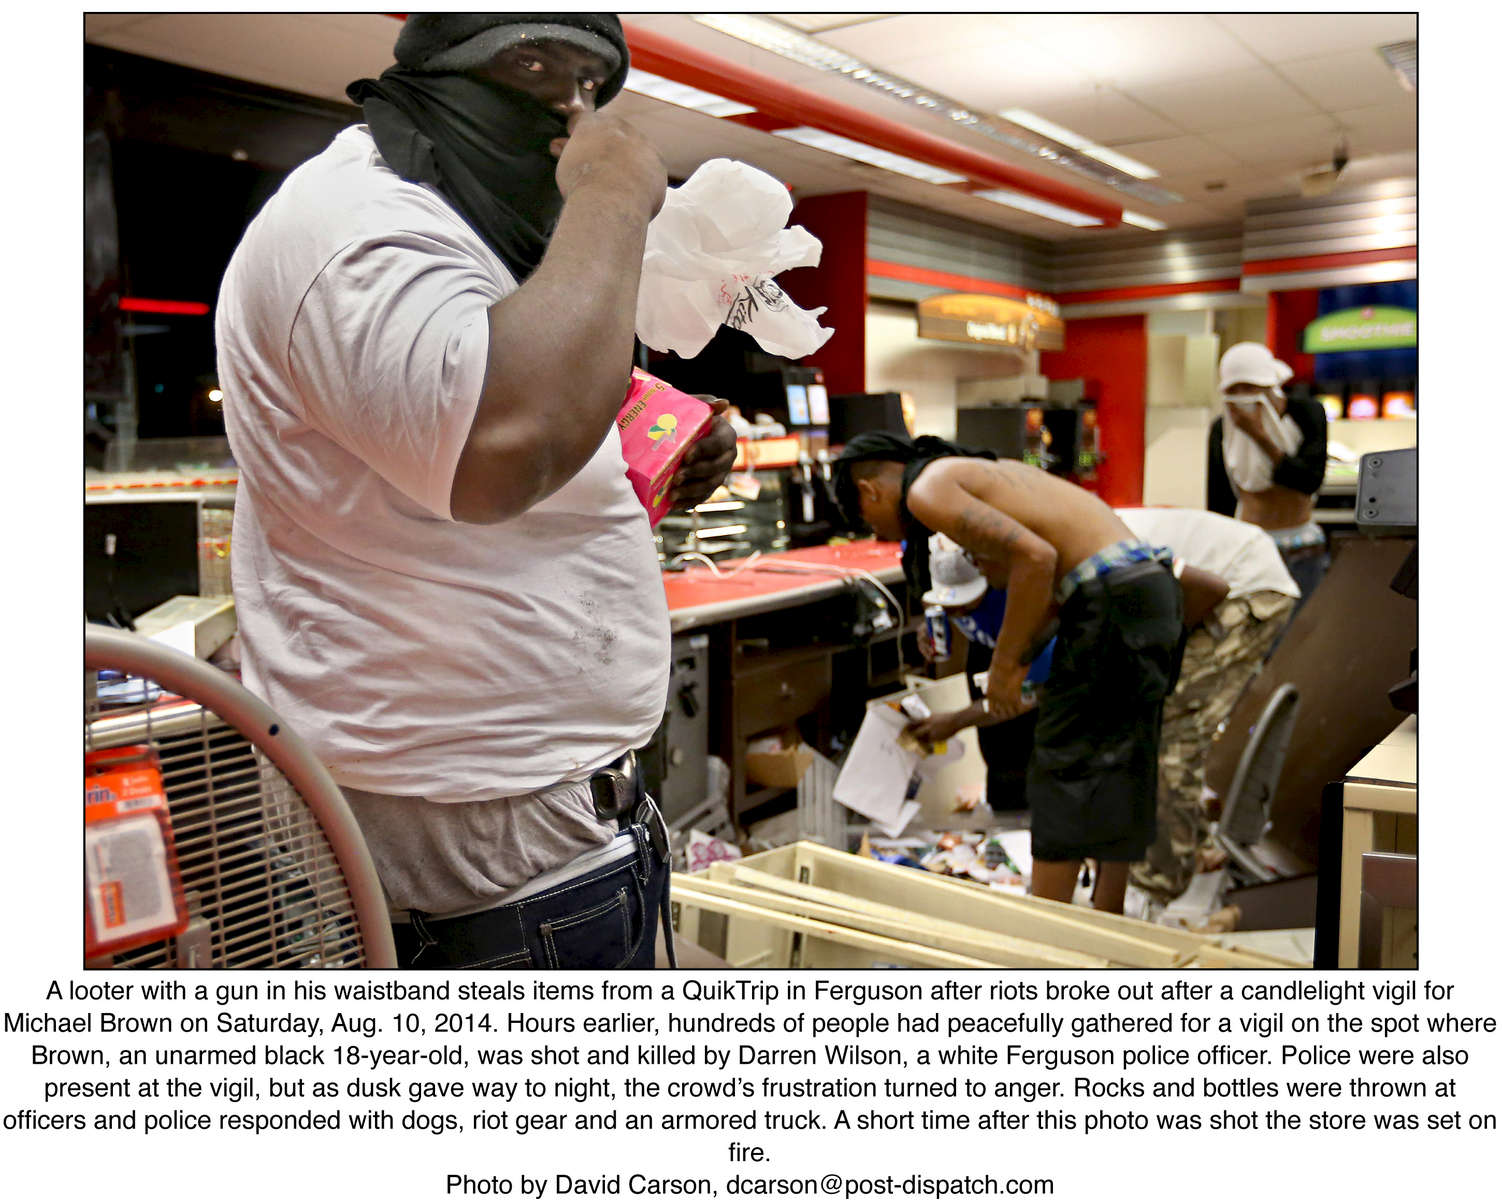 A looter with a gun in his waistband steals items from a QuikTrip in Ferguson after riots broke out after a candlelight vigil for Michael Brown on Saturday, Aug. 10, 2014. Hours earlier, hundreds of people had peacefully gathered for a vigil on the spot where Brown, an unarmed black 18-year-old, was shot and killed by Darren Wilson, a white Ferguson police officer. Police were also present at the vigil, but as dusk gave way to night, the crowd’s frustration turned to anger. Rocks and bottles were thrown at officers and police responded with dogs, riot gear and an armored truck. A short time after this photo was shot the store was set on fire.Photo by David Carson, dcarson@post-dispatch.com